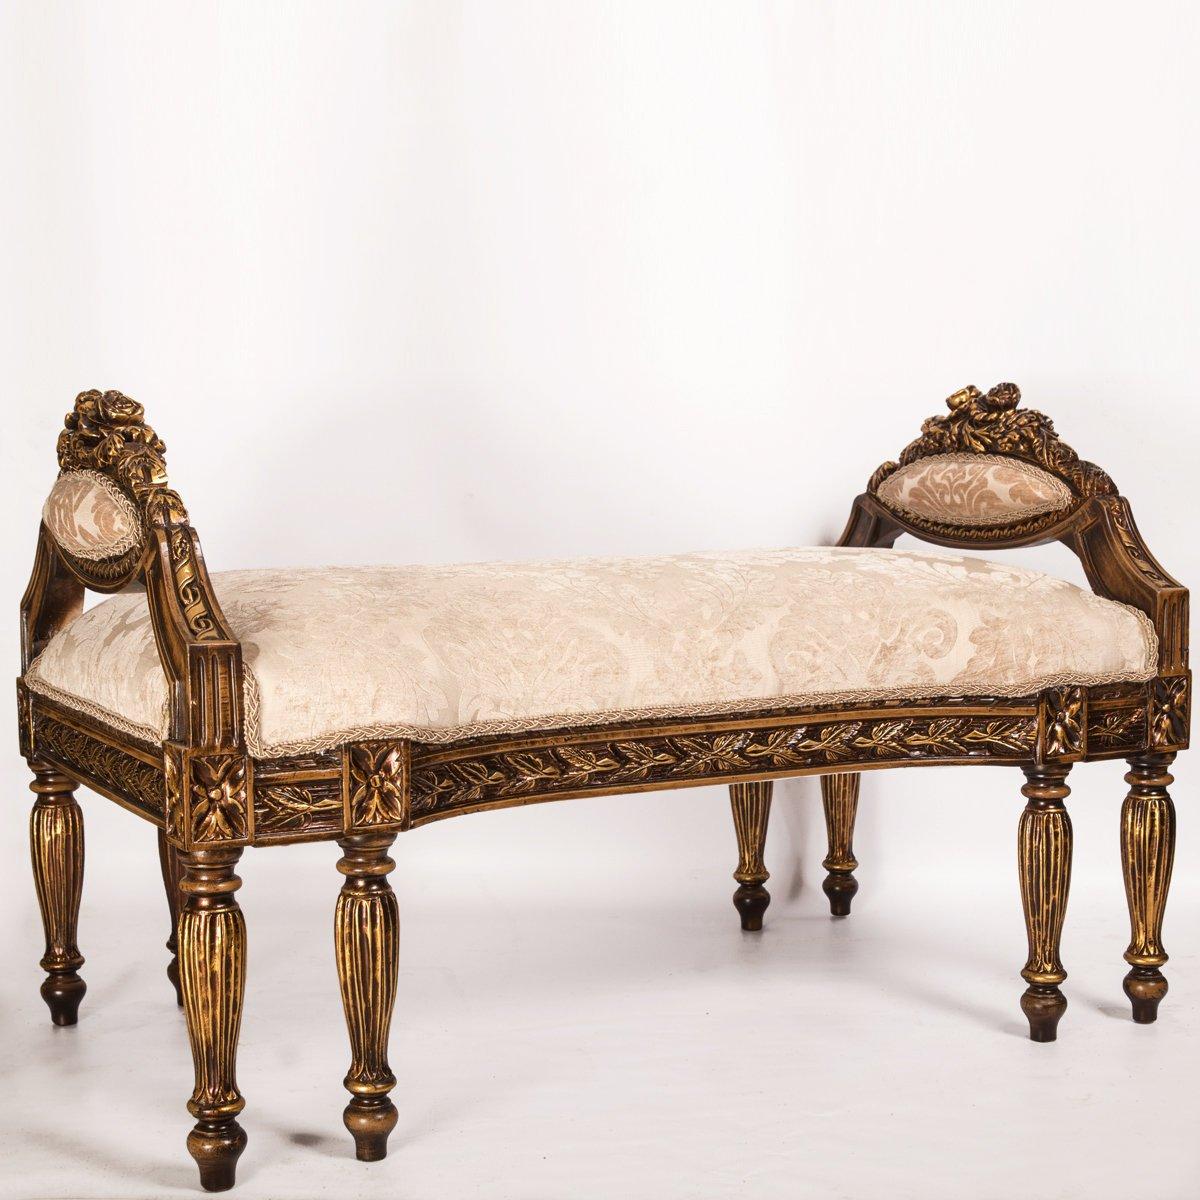 A unique French Rococo-style carved bench, 20th century.

The French Rococo-style carved bench is entirely made of gold gilded natural beechwood with antique oxides. This masterpiece was inspired by the French rococo-style which is characterized